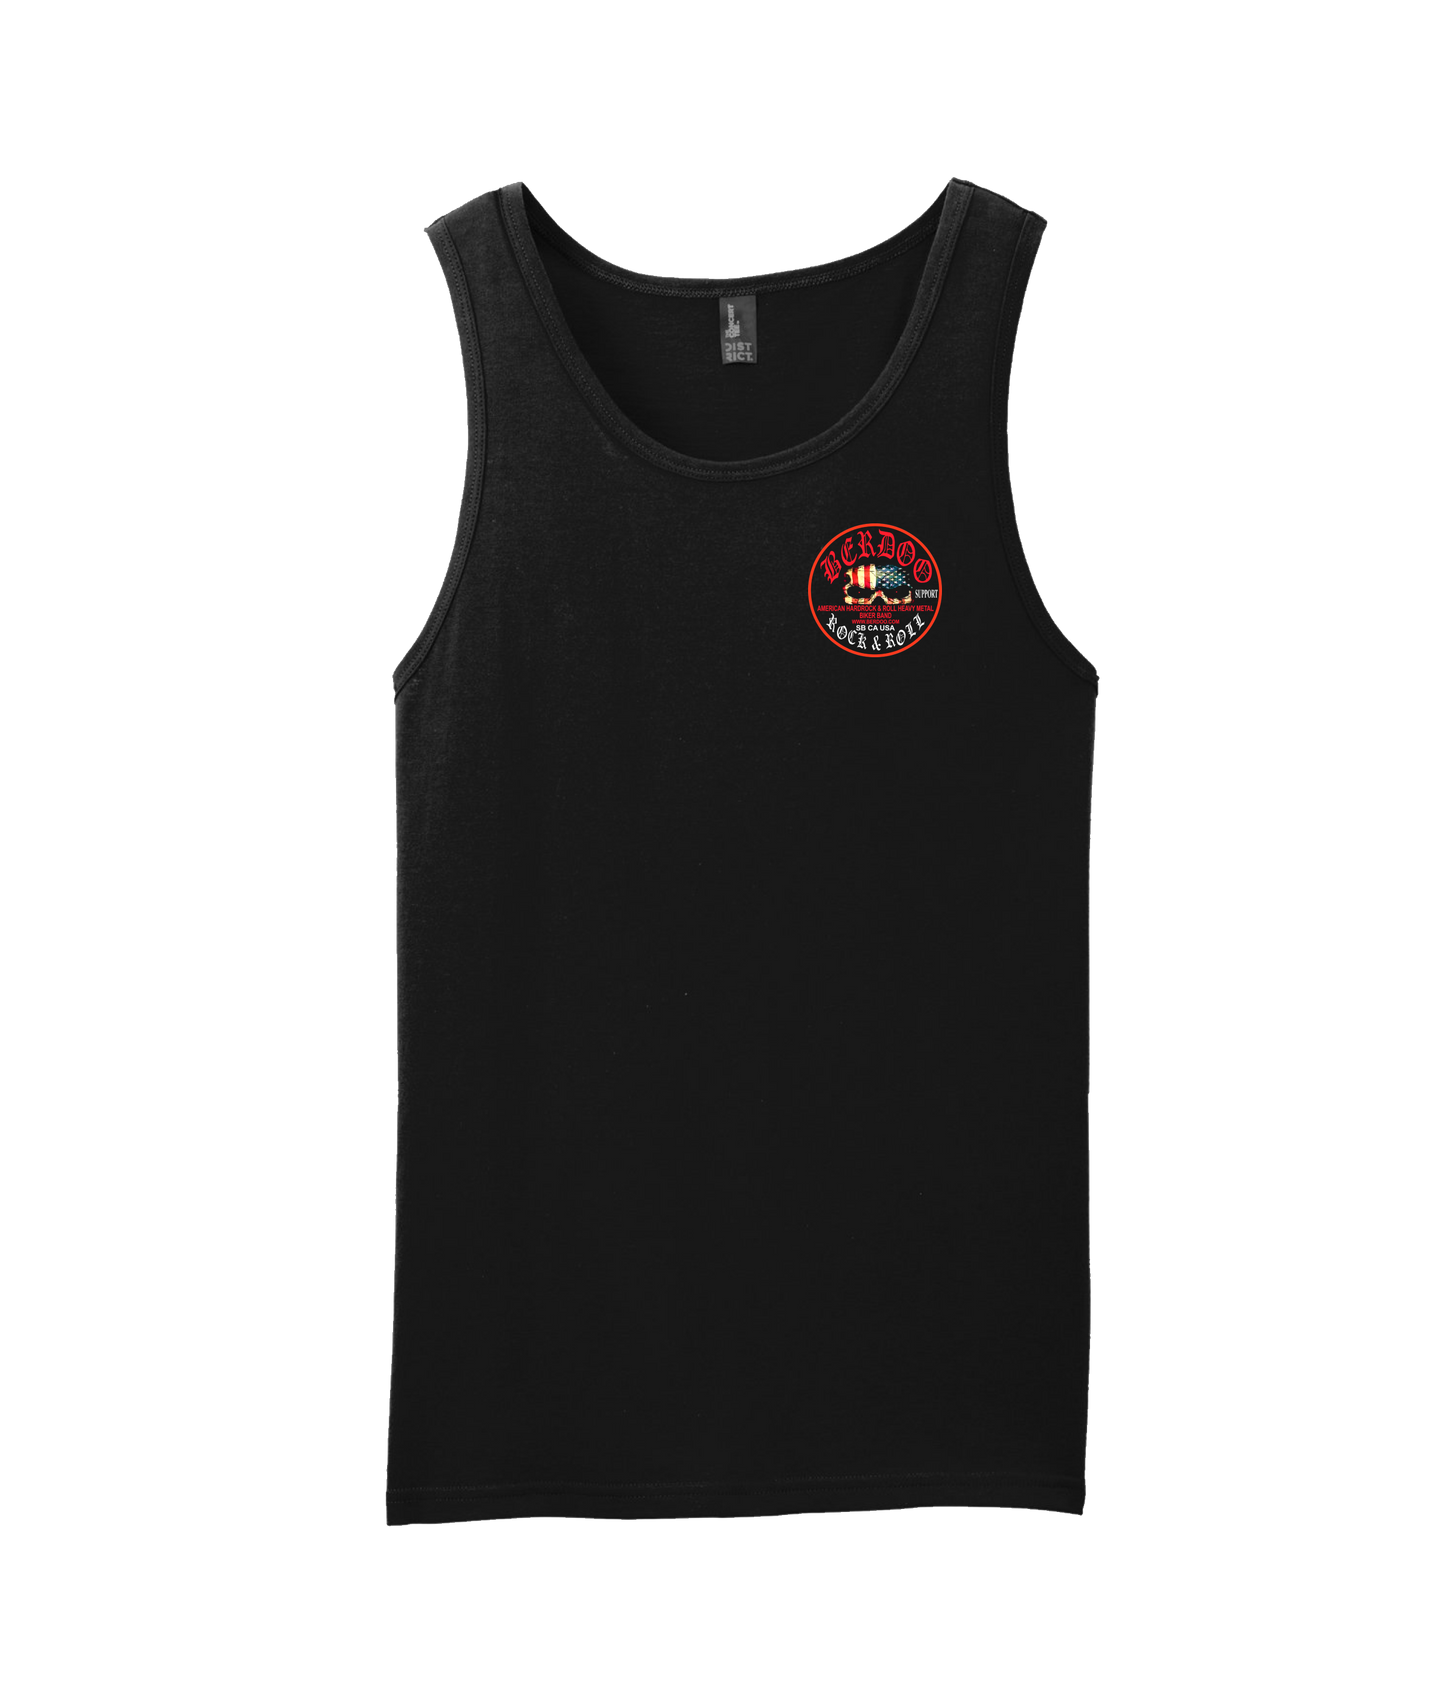 BERDOO BAND SUPPORT GEAR - Logo (red) - Black Tank Top